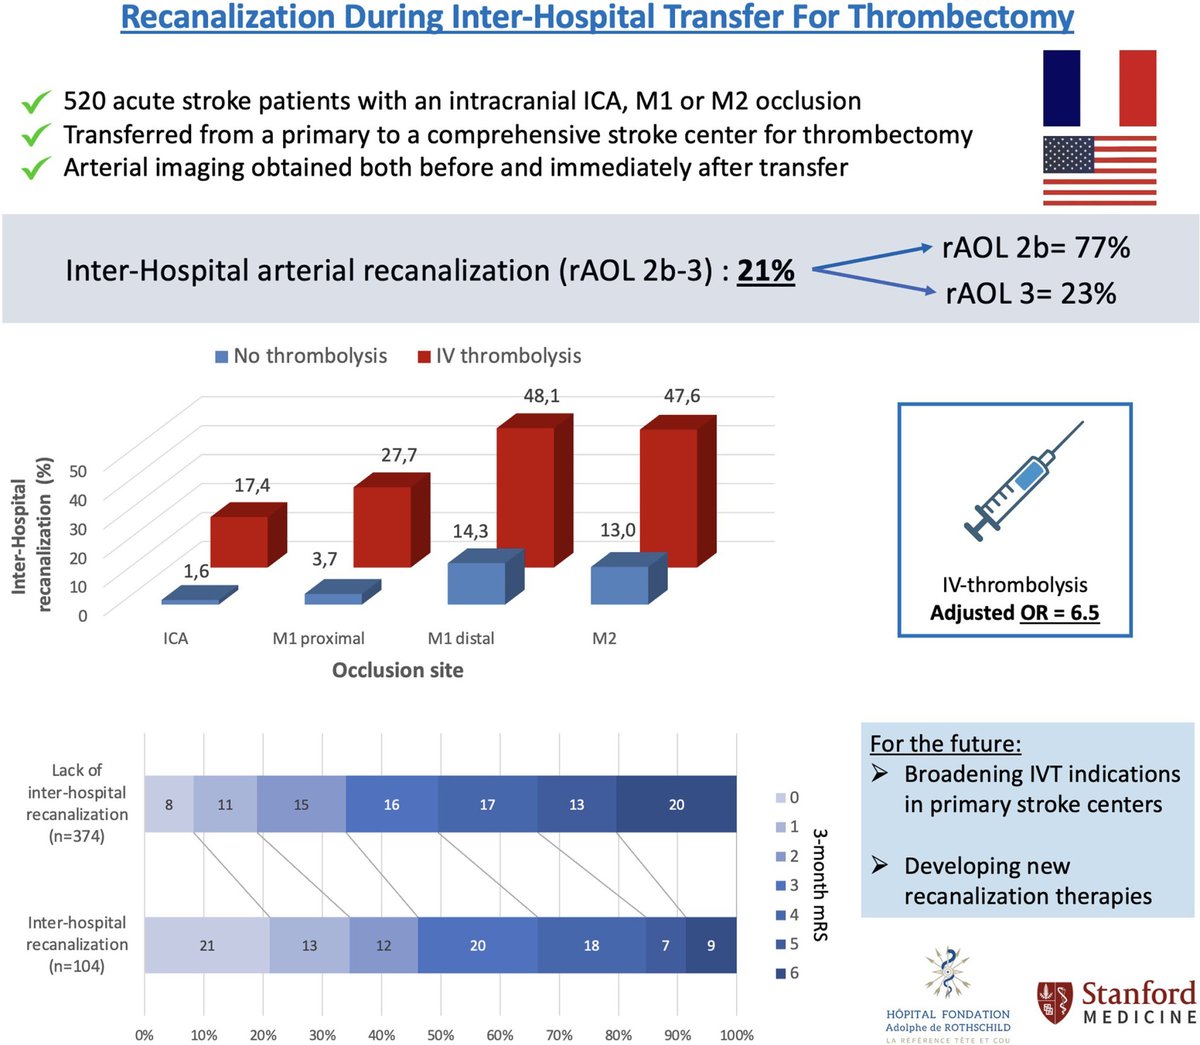 #STROKE: Spontaneous or thrombolysis-associated recanalization during interhospital transfer is associated with improved clinical outcomes for patients with intracranial large vessel occlusion, even when incomplete. #ESOC2024 #AHAJournals @JeremyHeitMDPHD ahajrnls.org/4ahKB5i